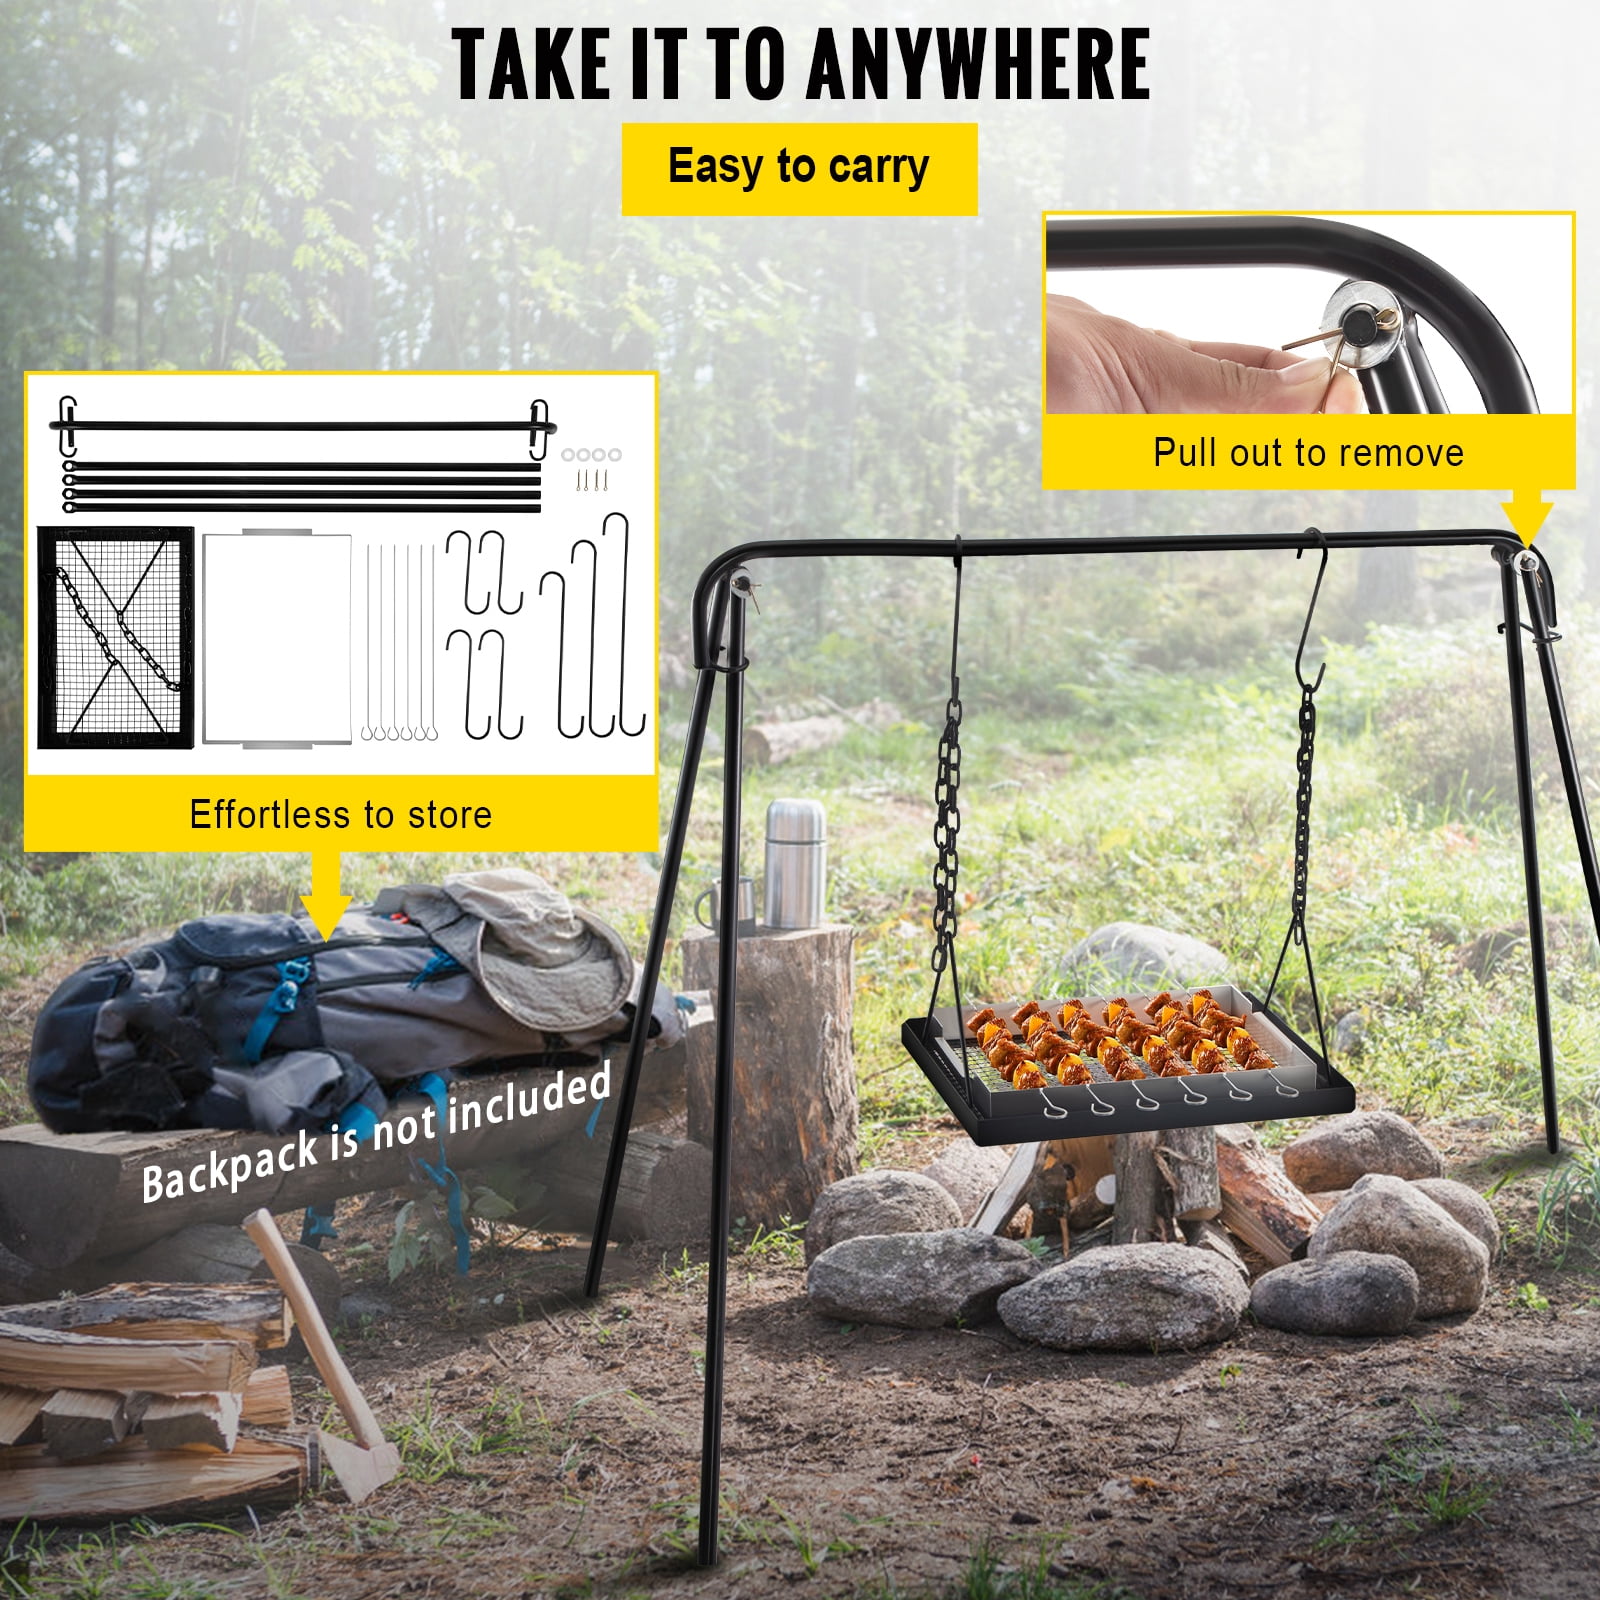 Grill Swing, Campfire Cooking Stand 44 Lbs Capacity, Campfire